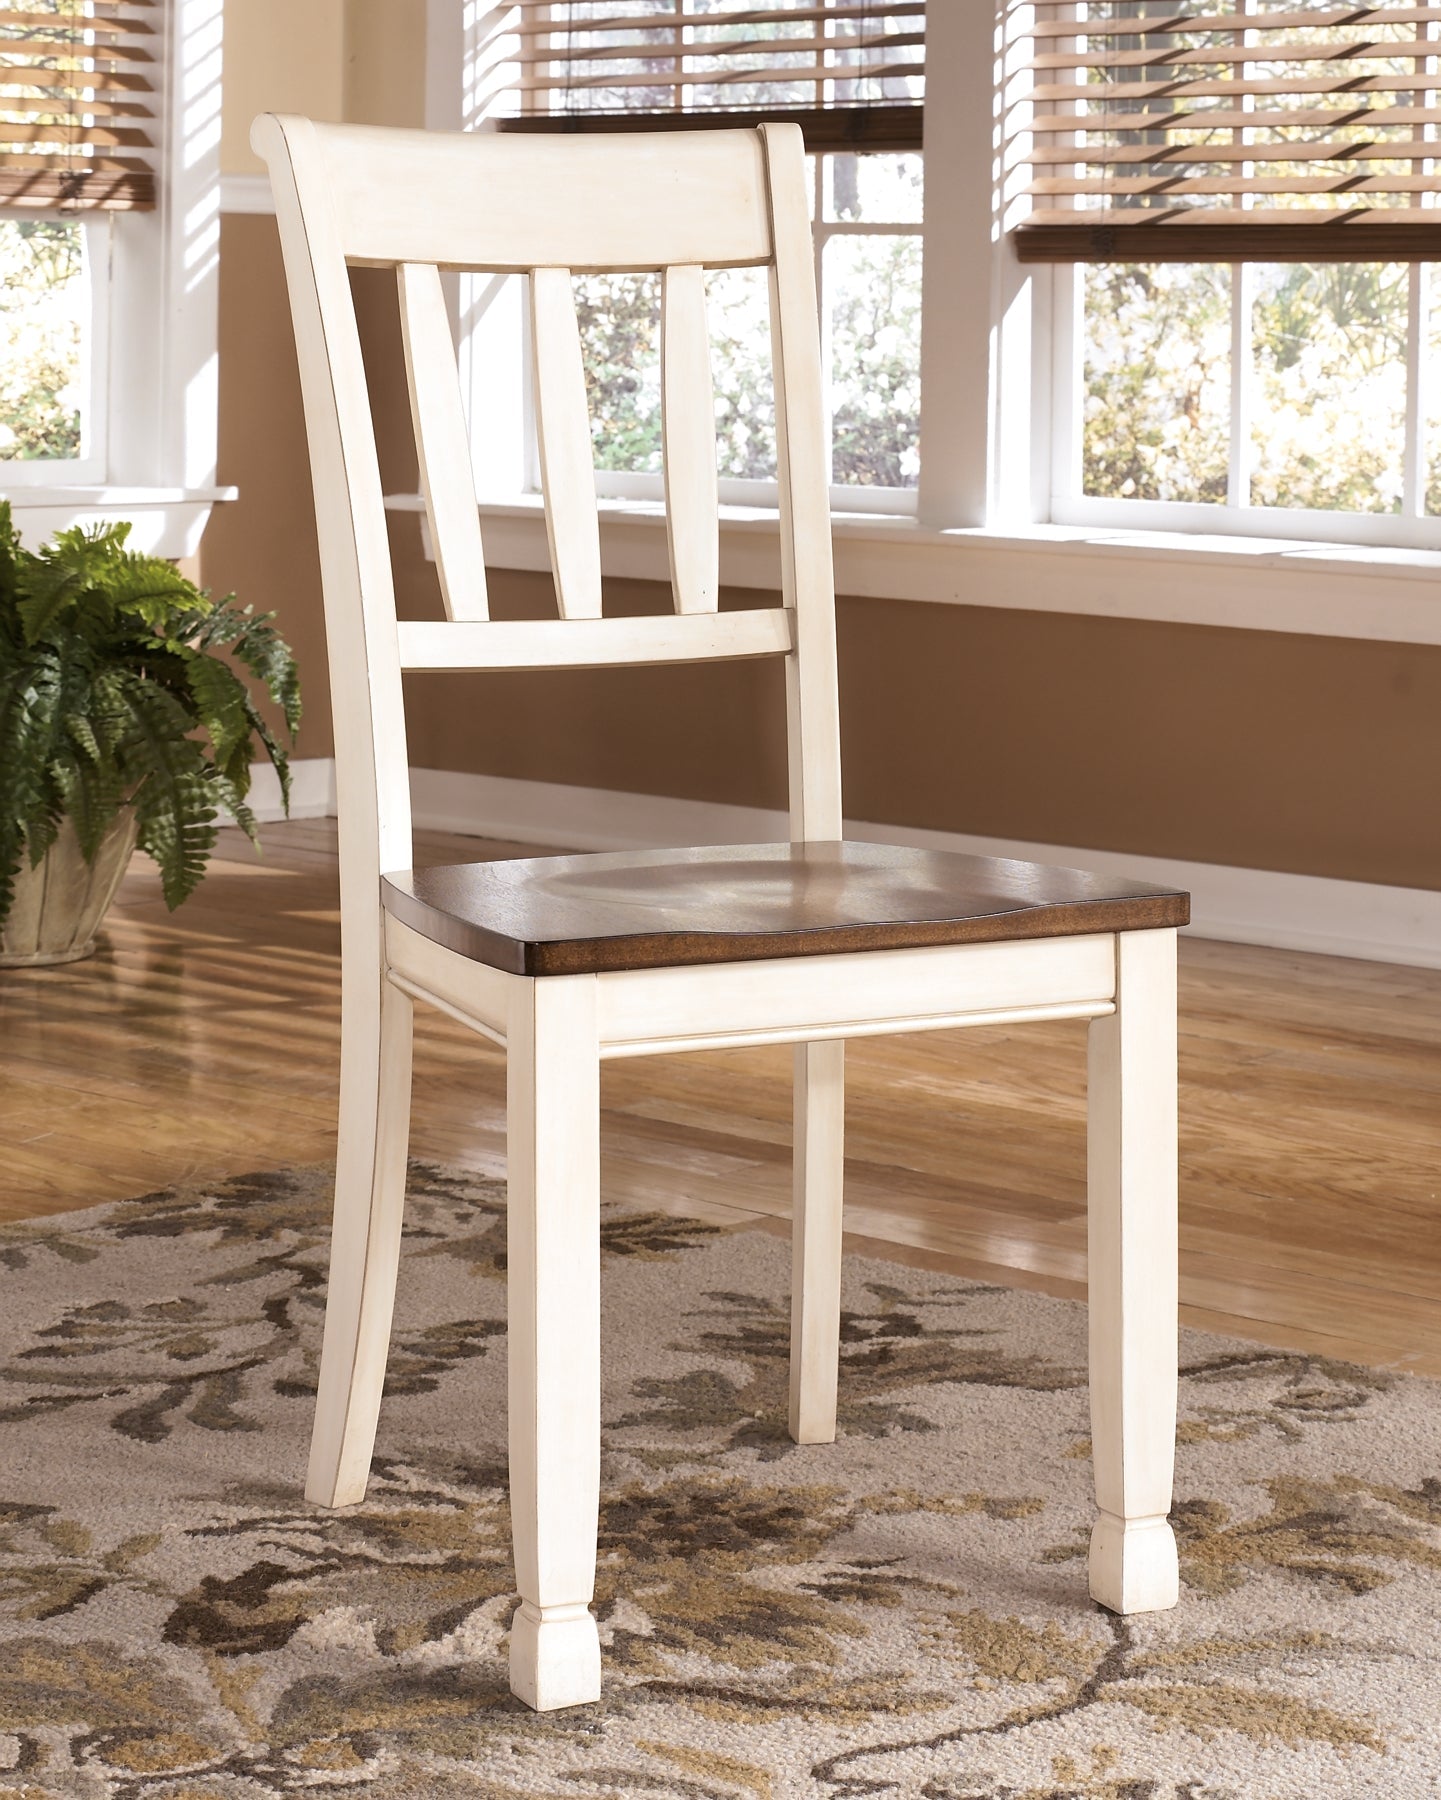 Whitesburg Dining Table and 4 Chairs with Storage at Cloud 9 Mattress & Furniture furniture, home furnishing, home decor